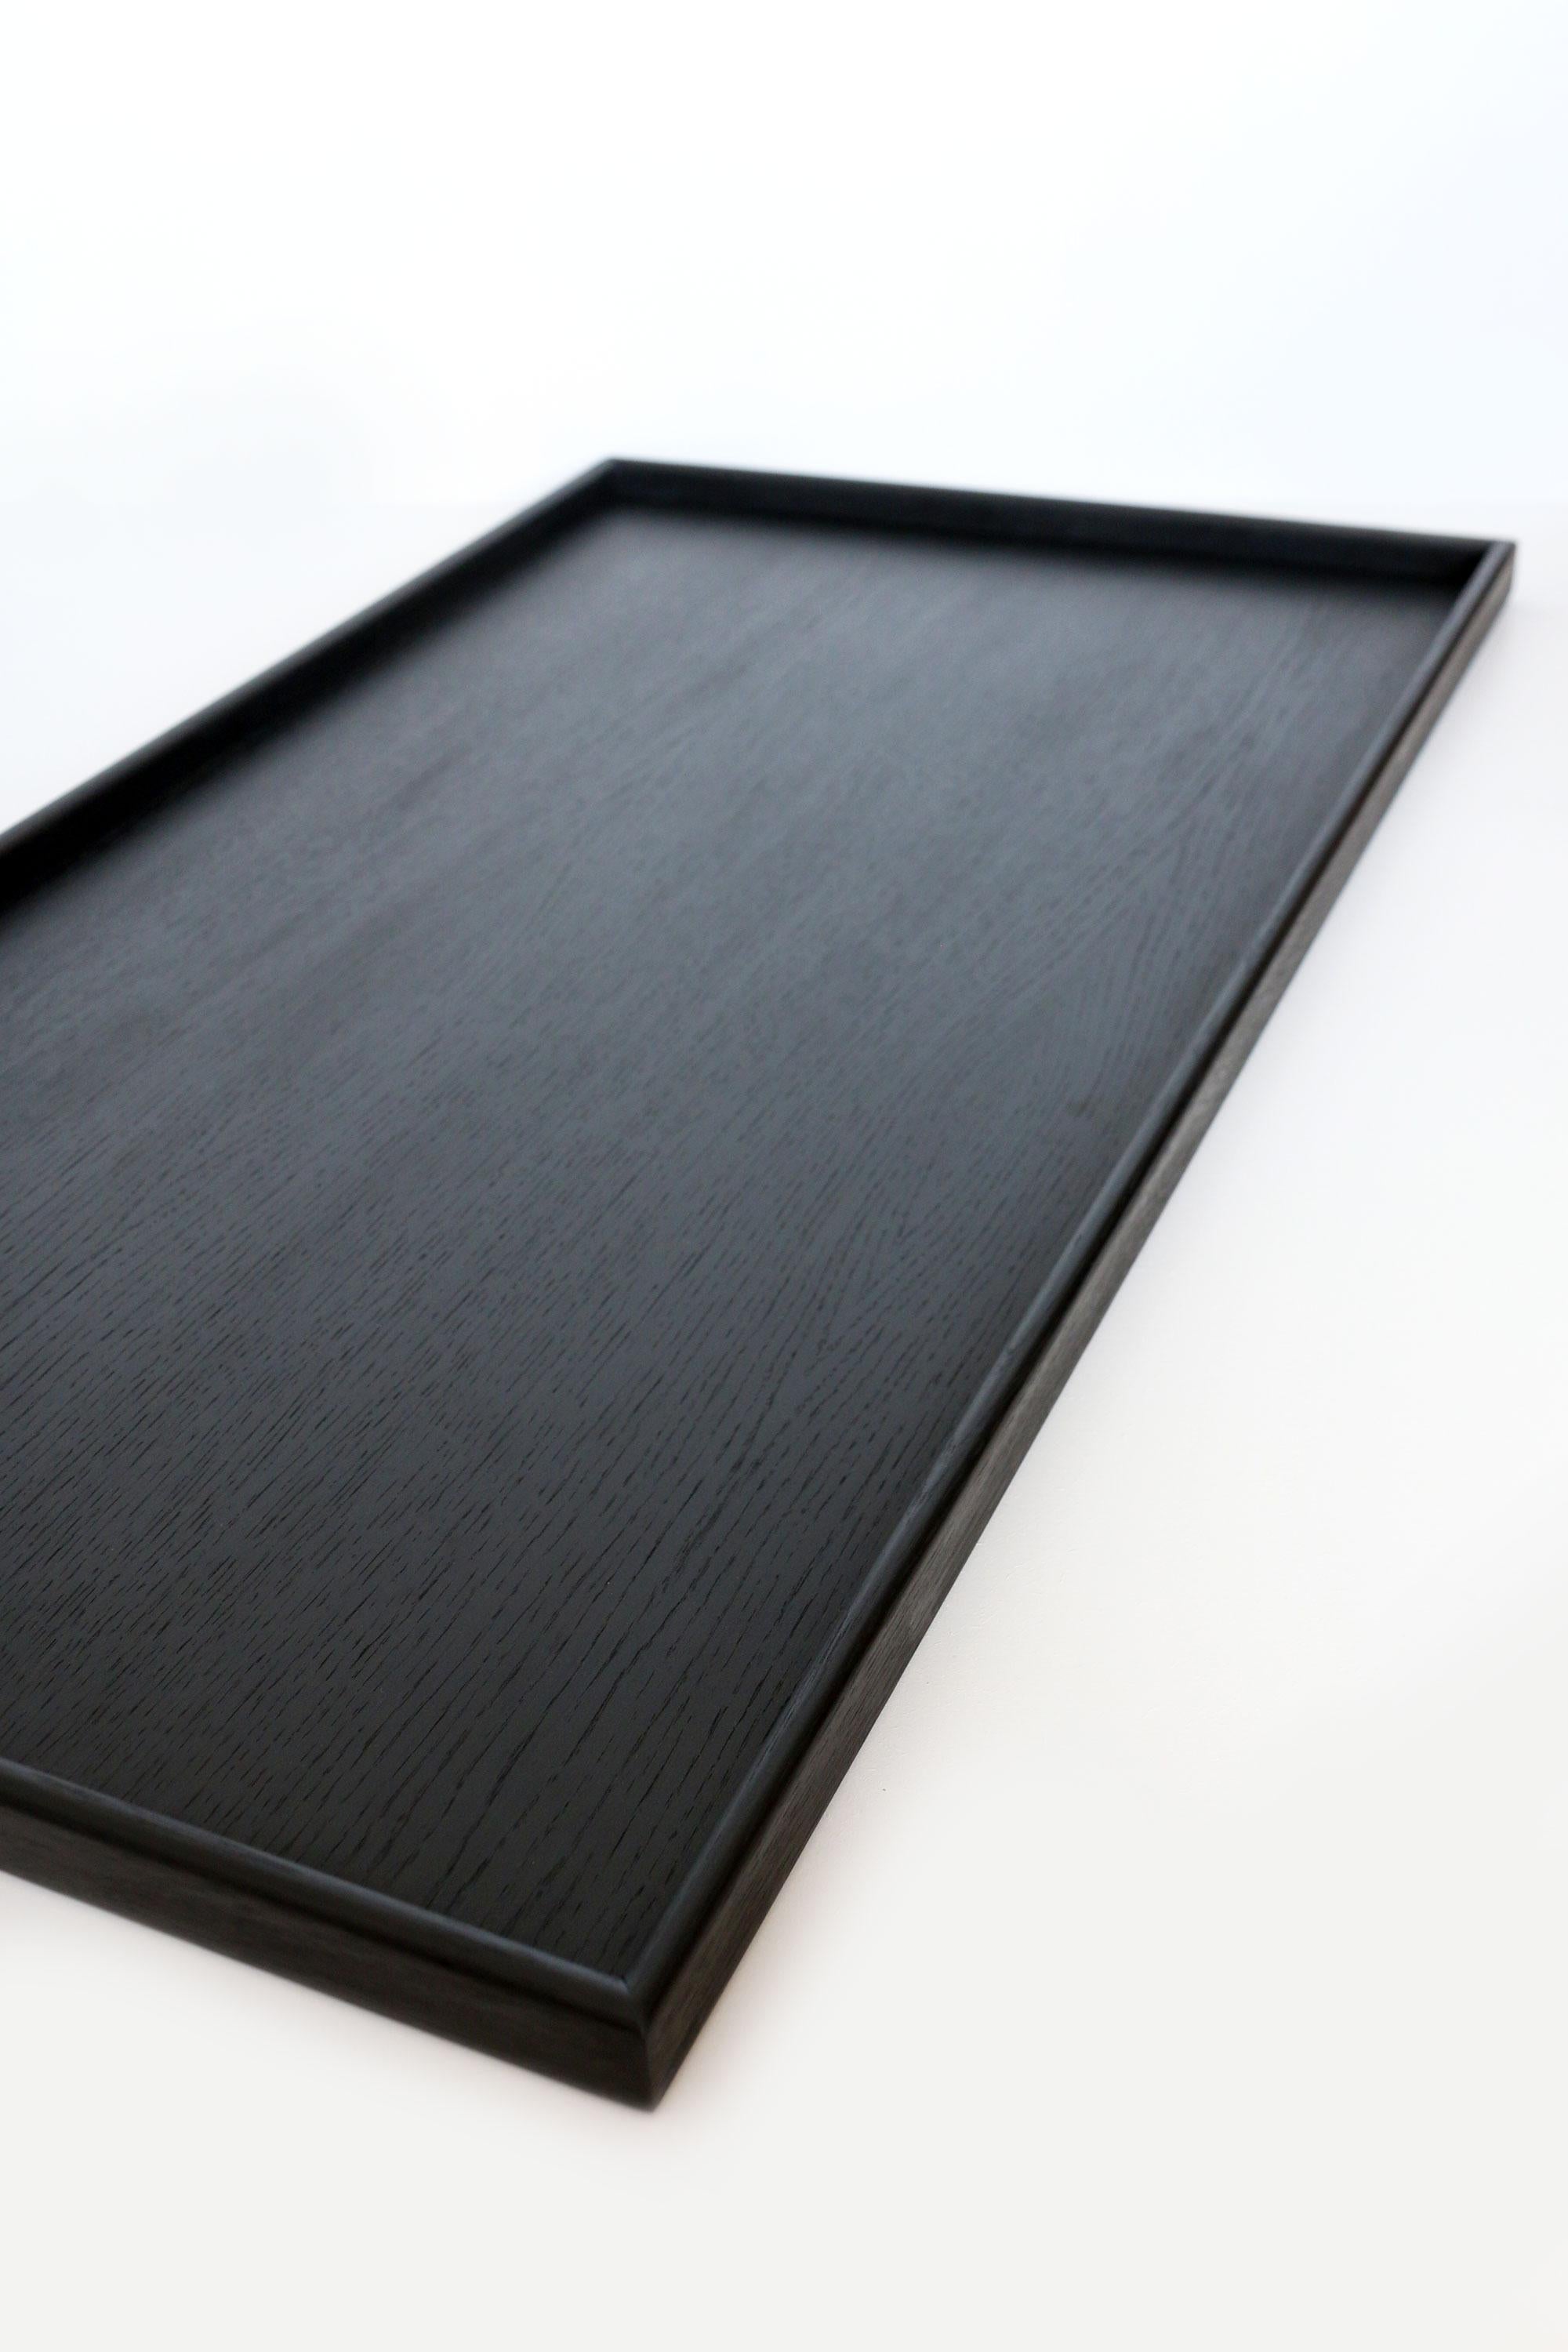 British Small Handmade Black Wooden Serving Tray 45 x 35cm For Sale